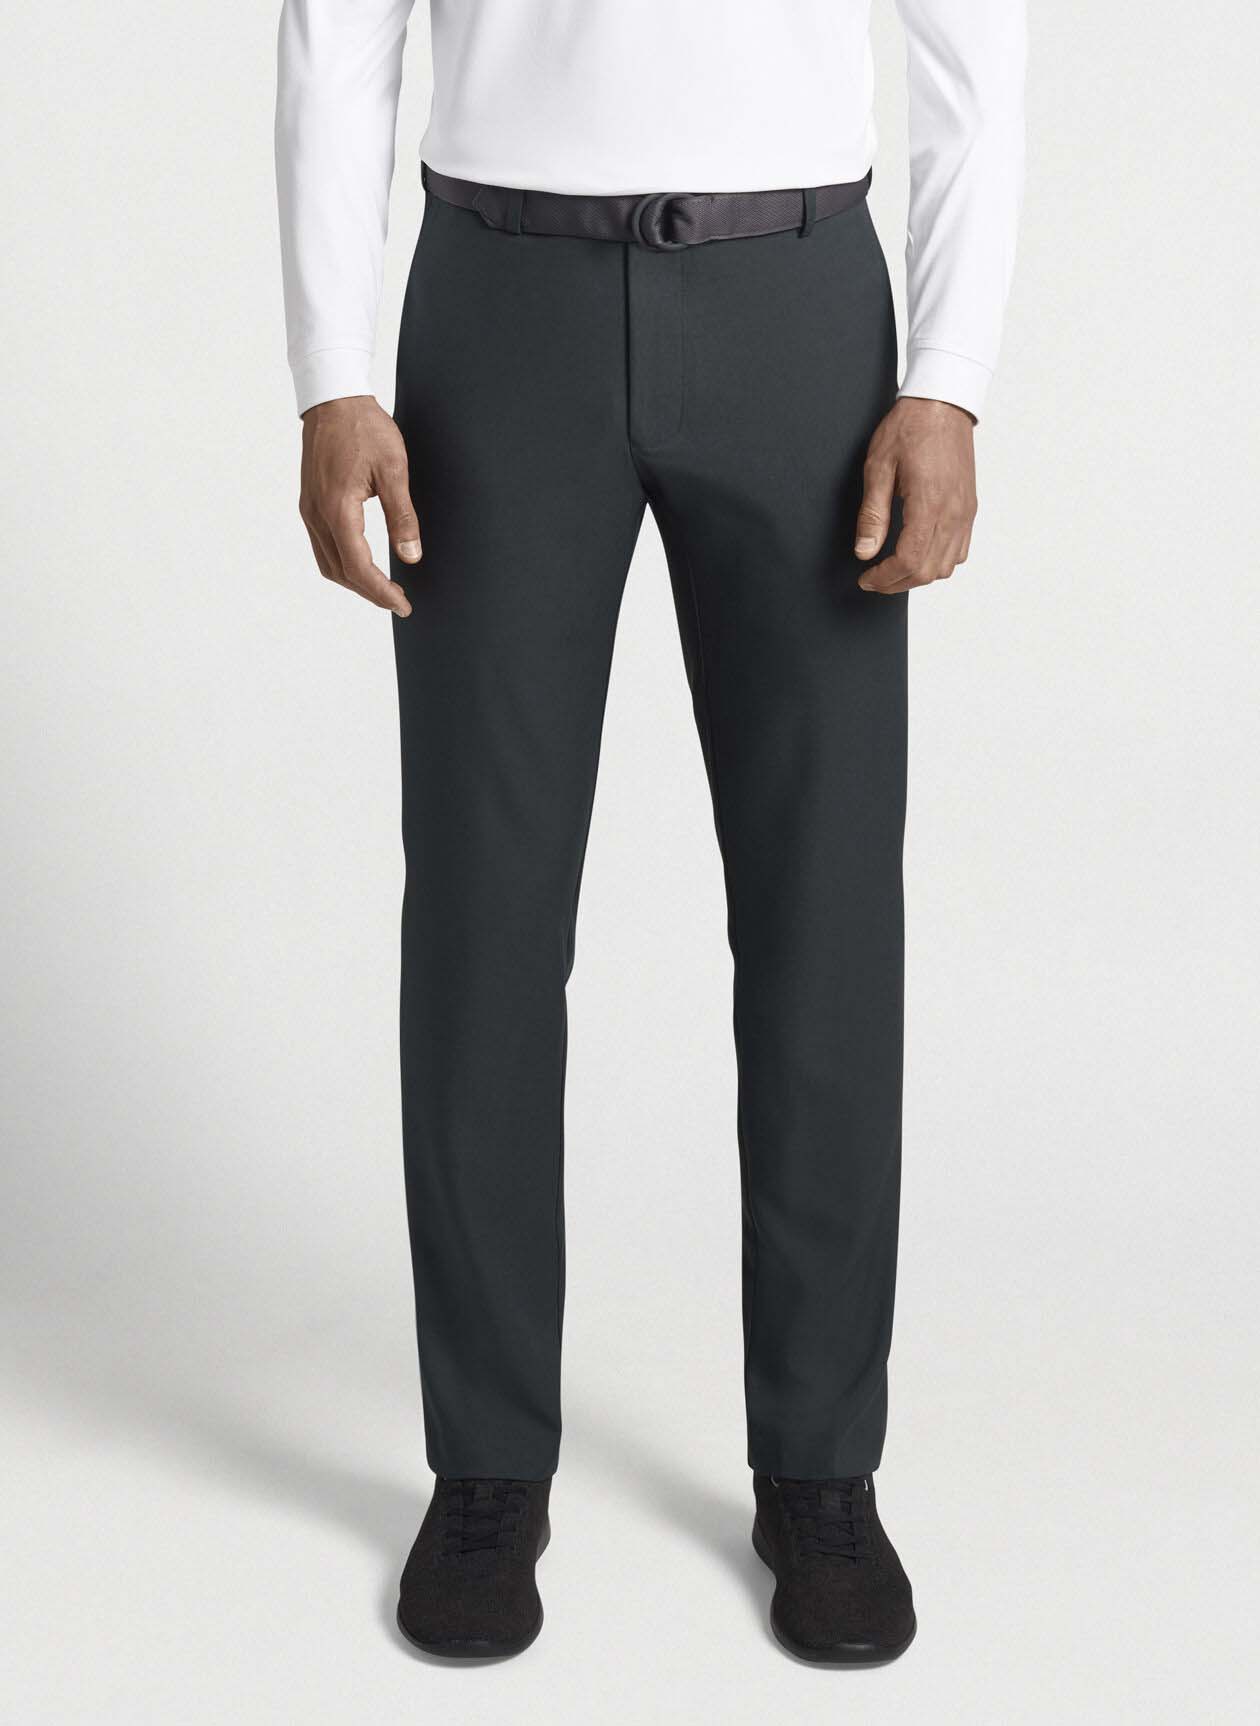 FRANKLIN PERFORMANCE TROUSER - CHARCOAL